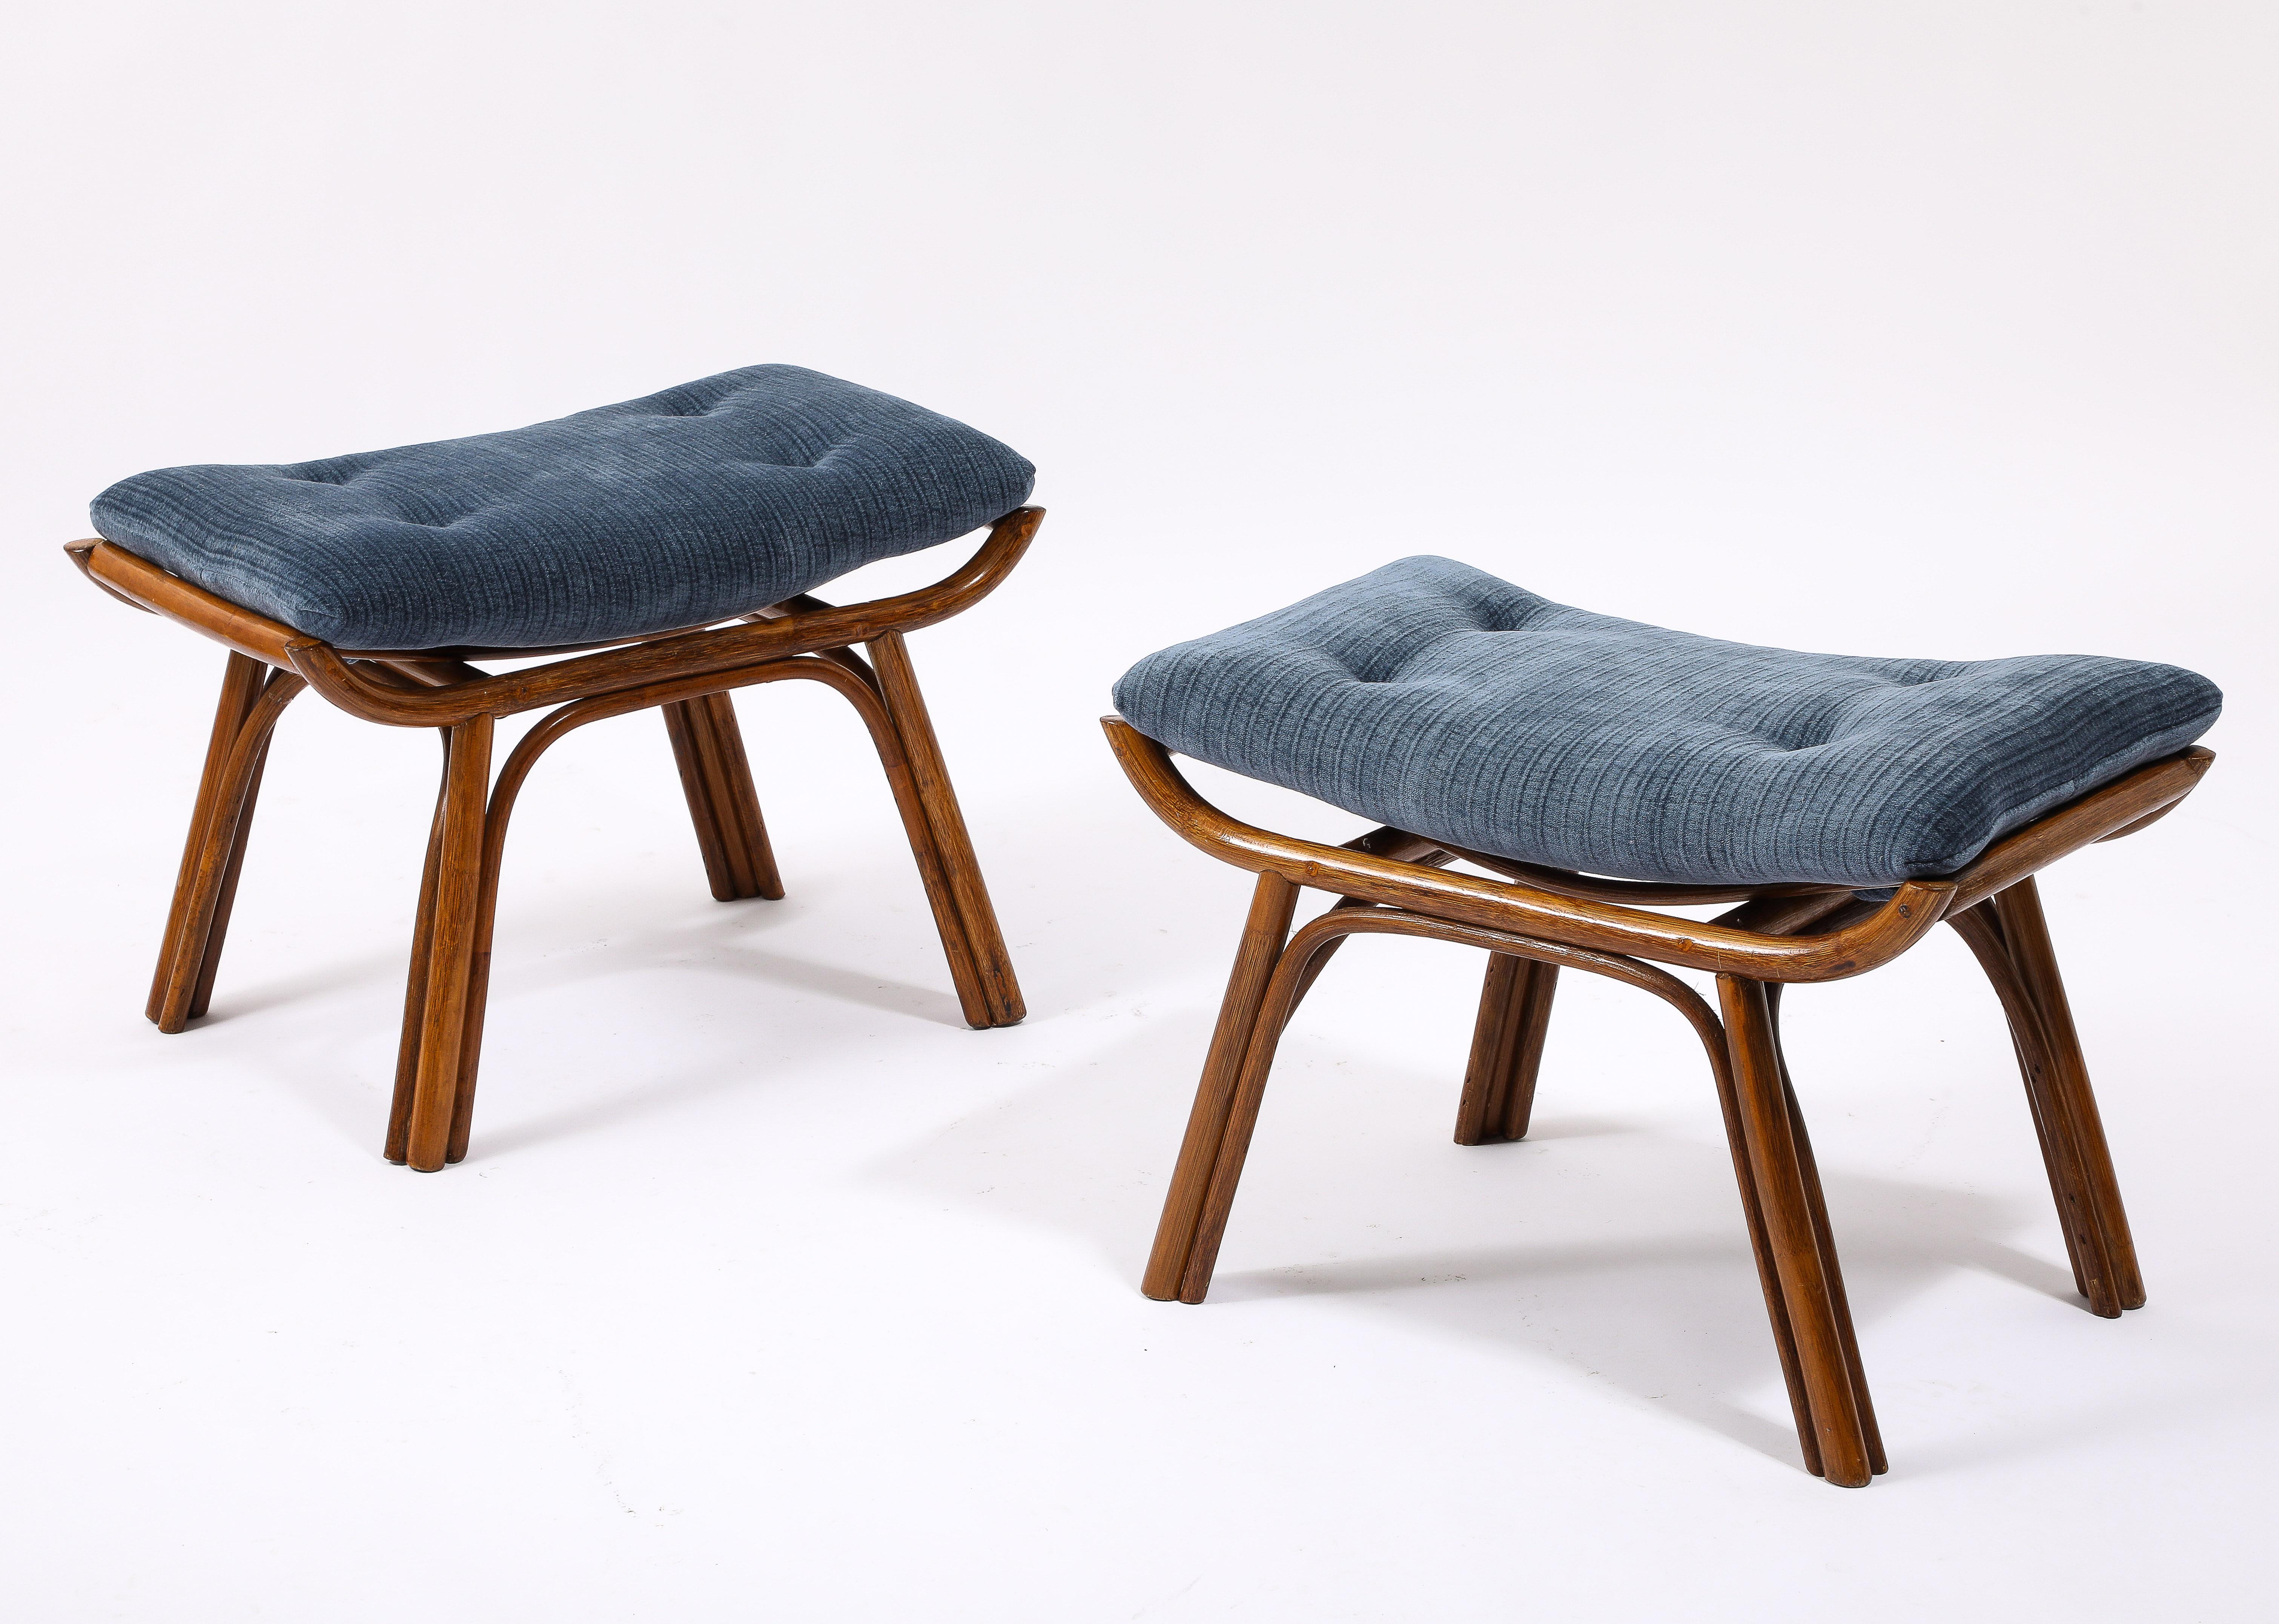 Pair of curved Bamboo stools upholstered in mohair.
